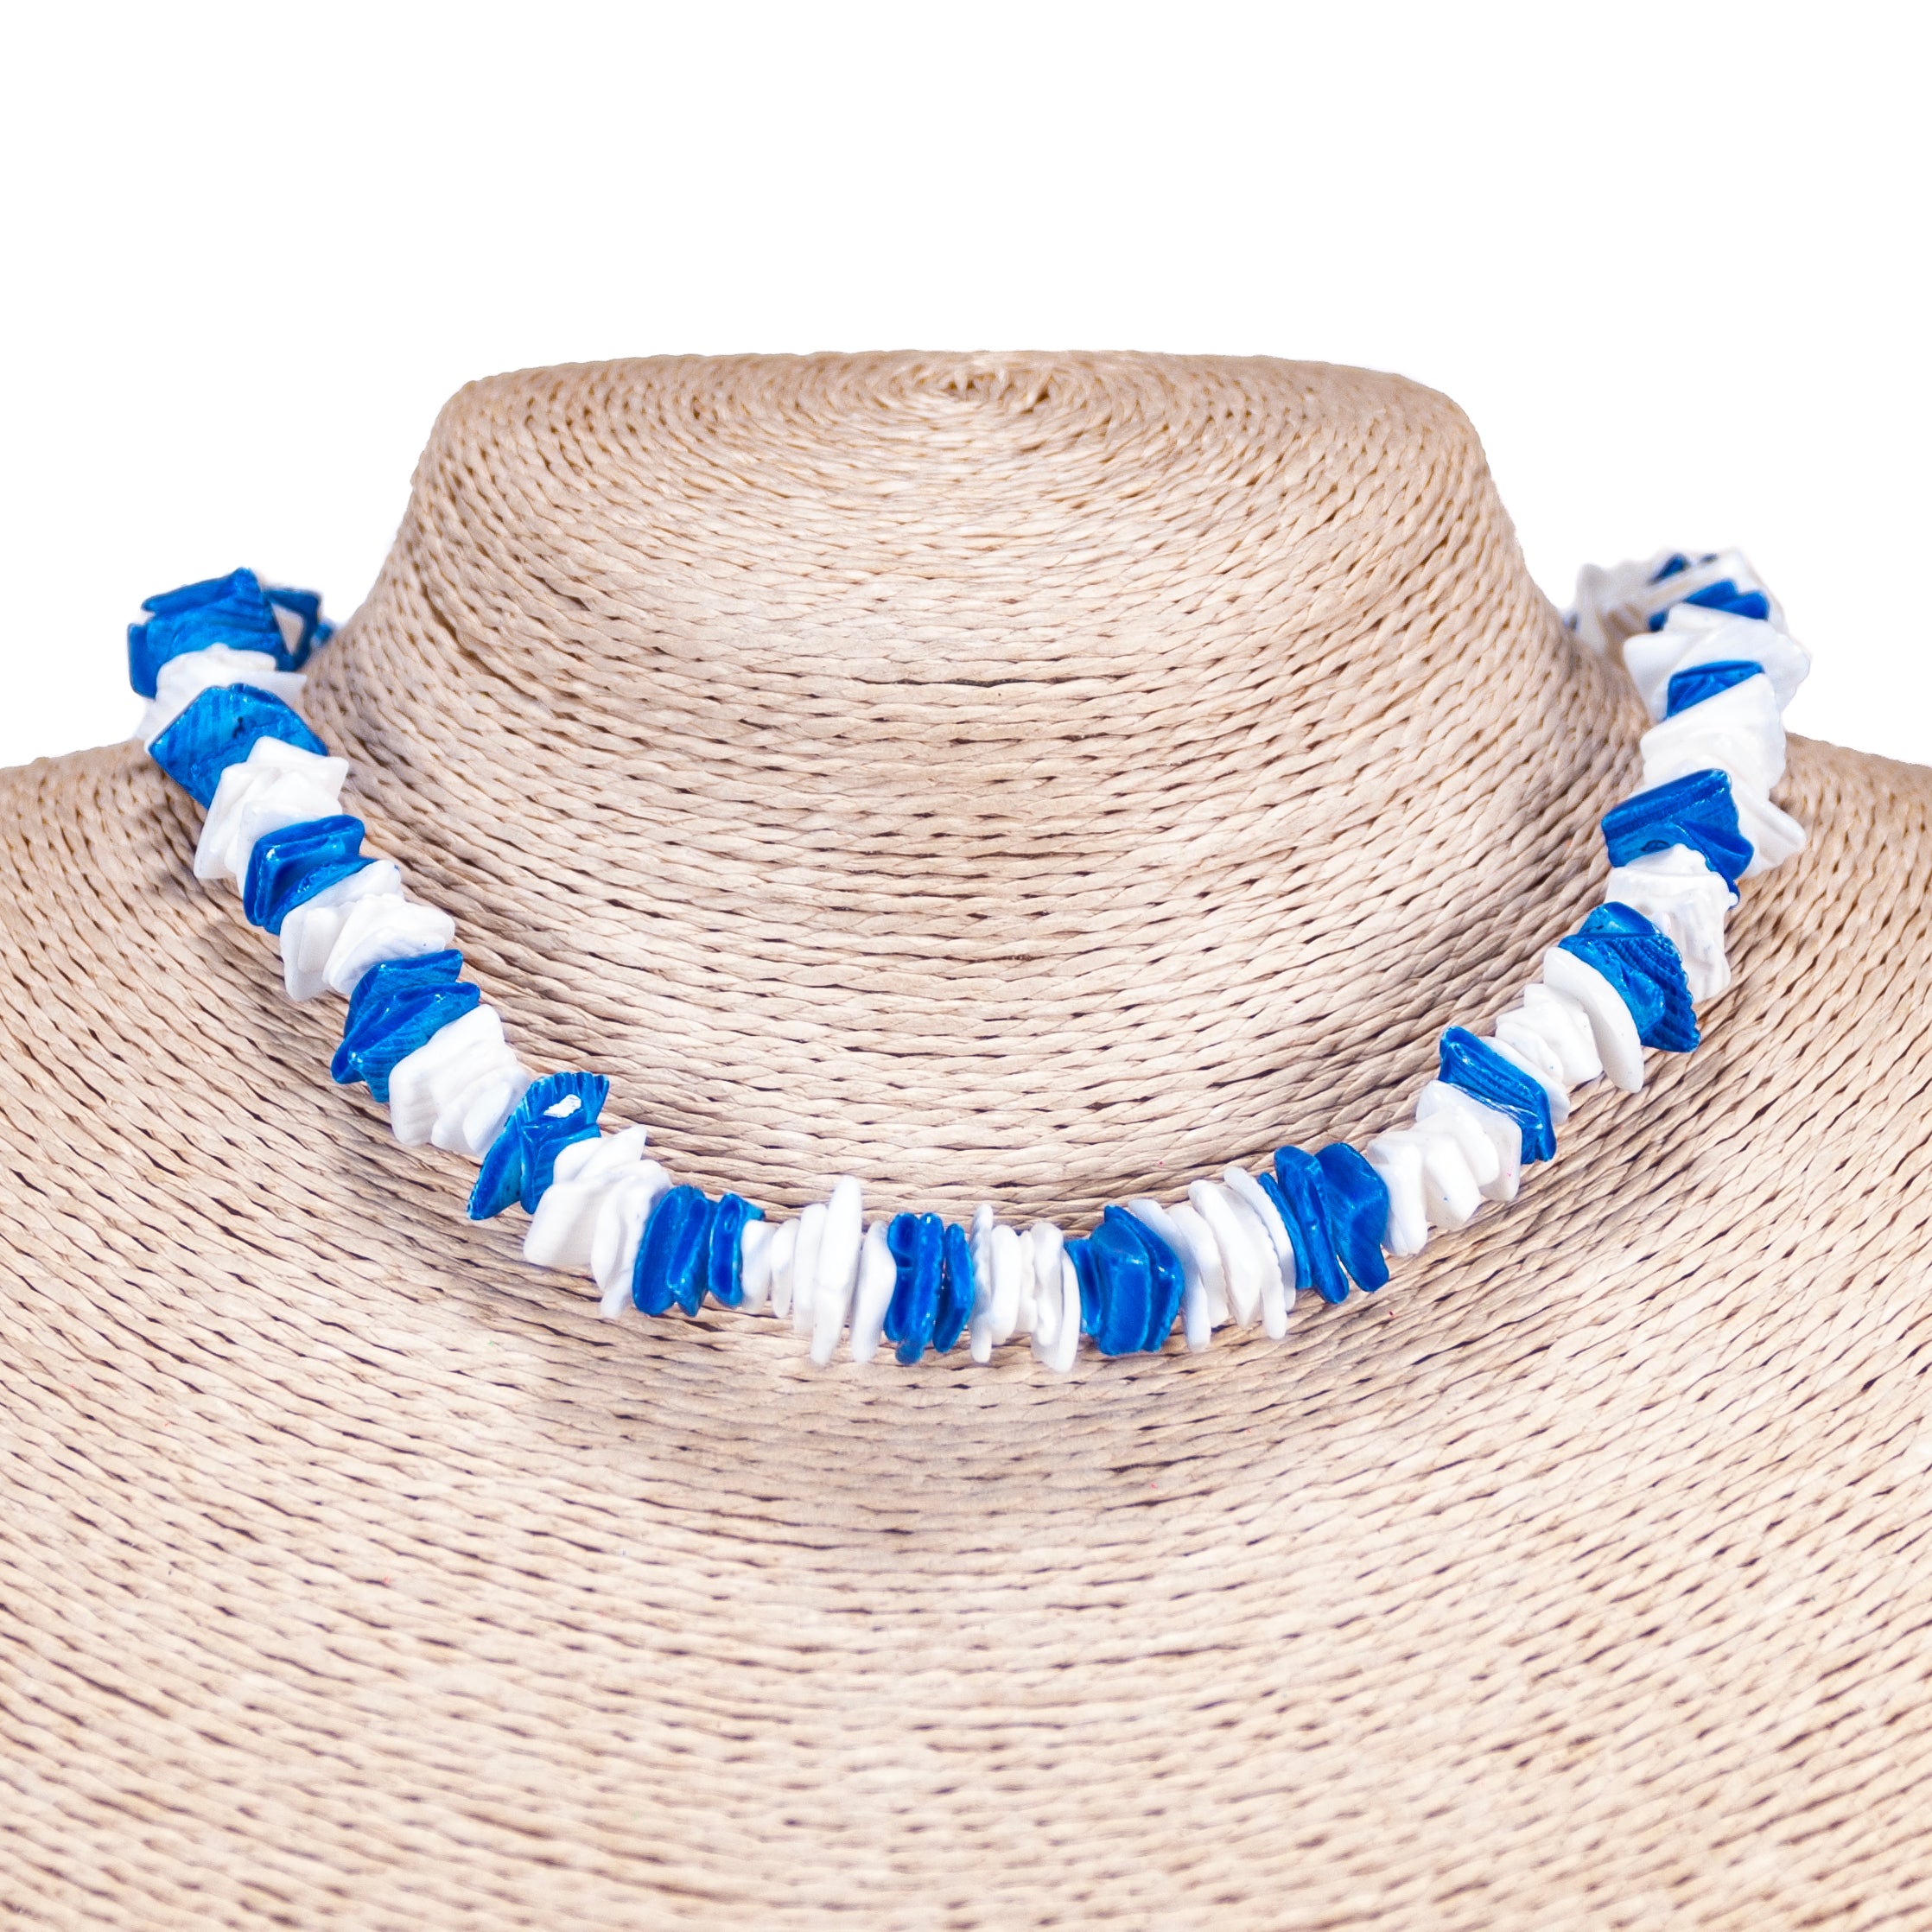 Native Treasure Smooth White Blue Chip Black Coco Puka Shell Necklace 8mm  5/16 7 to 30 - Etsy